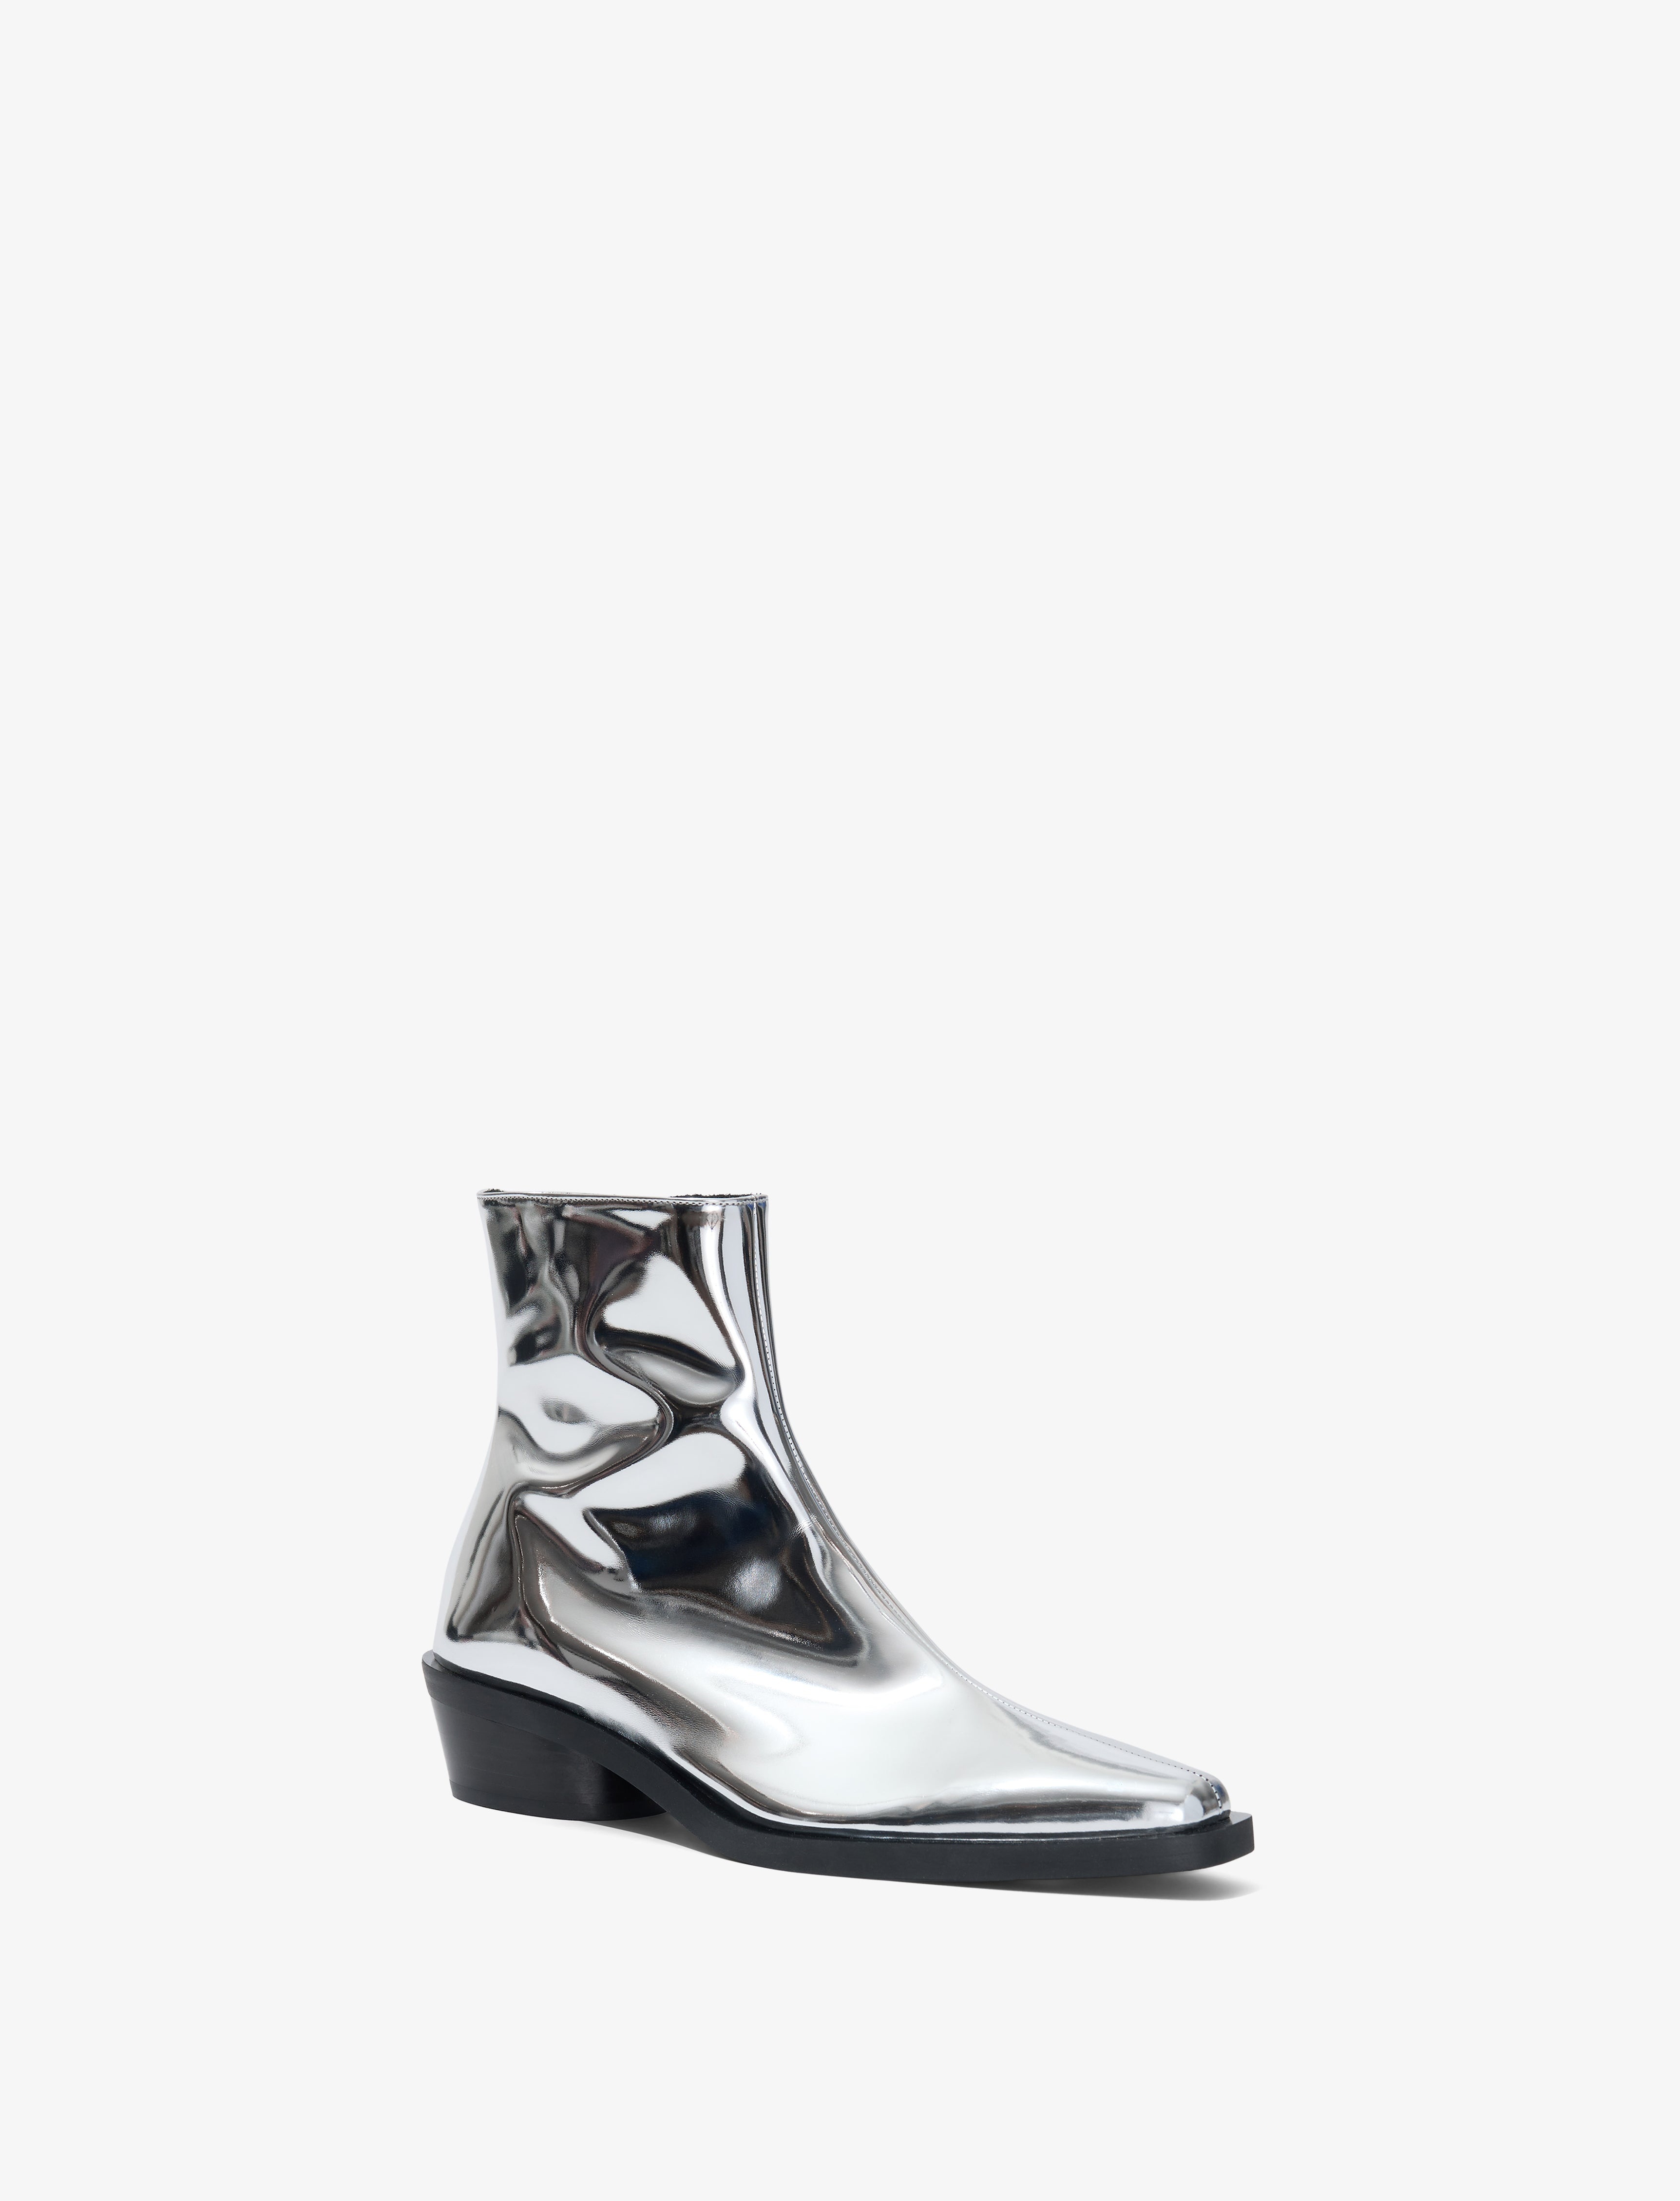 Bronco Ankle Boots in Mirrored Metallic - 2